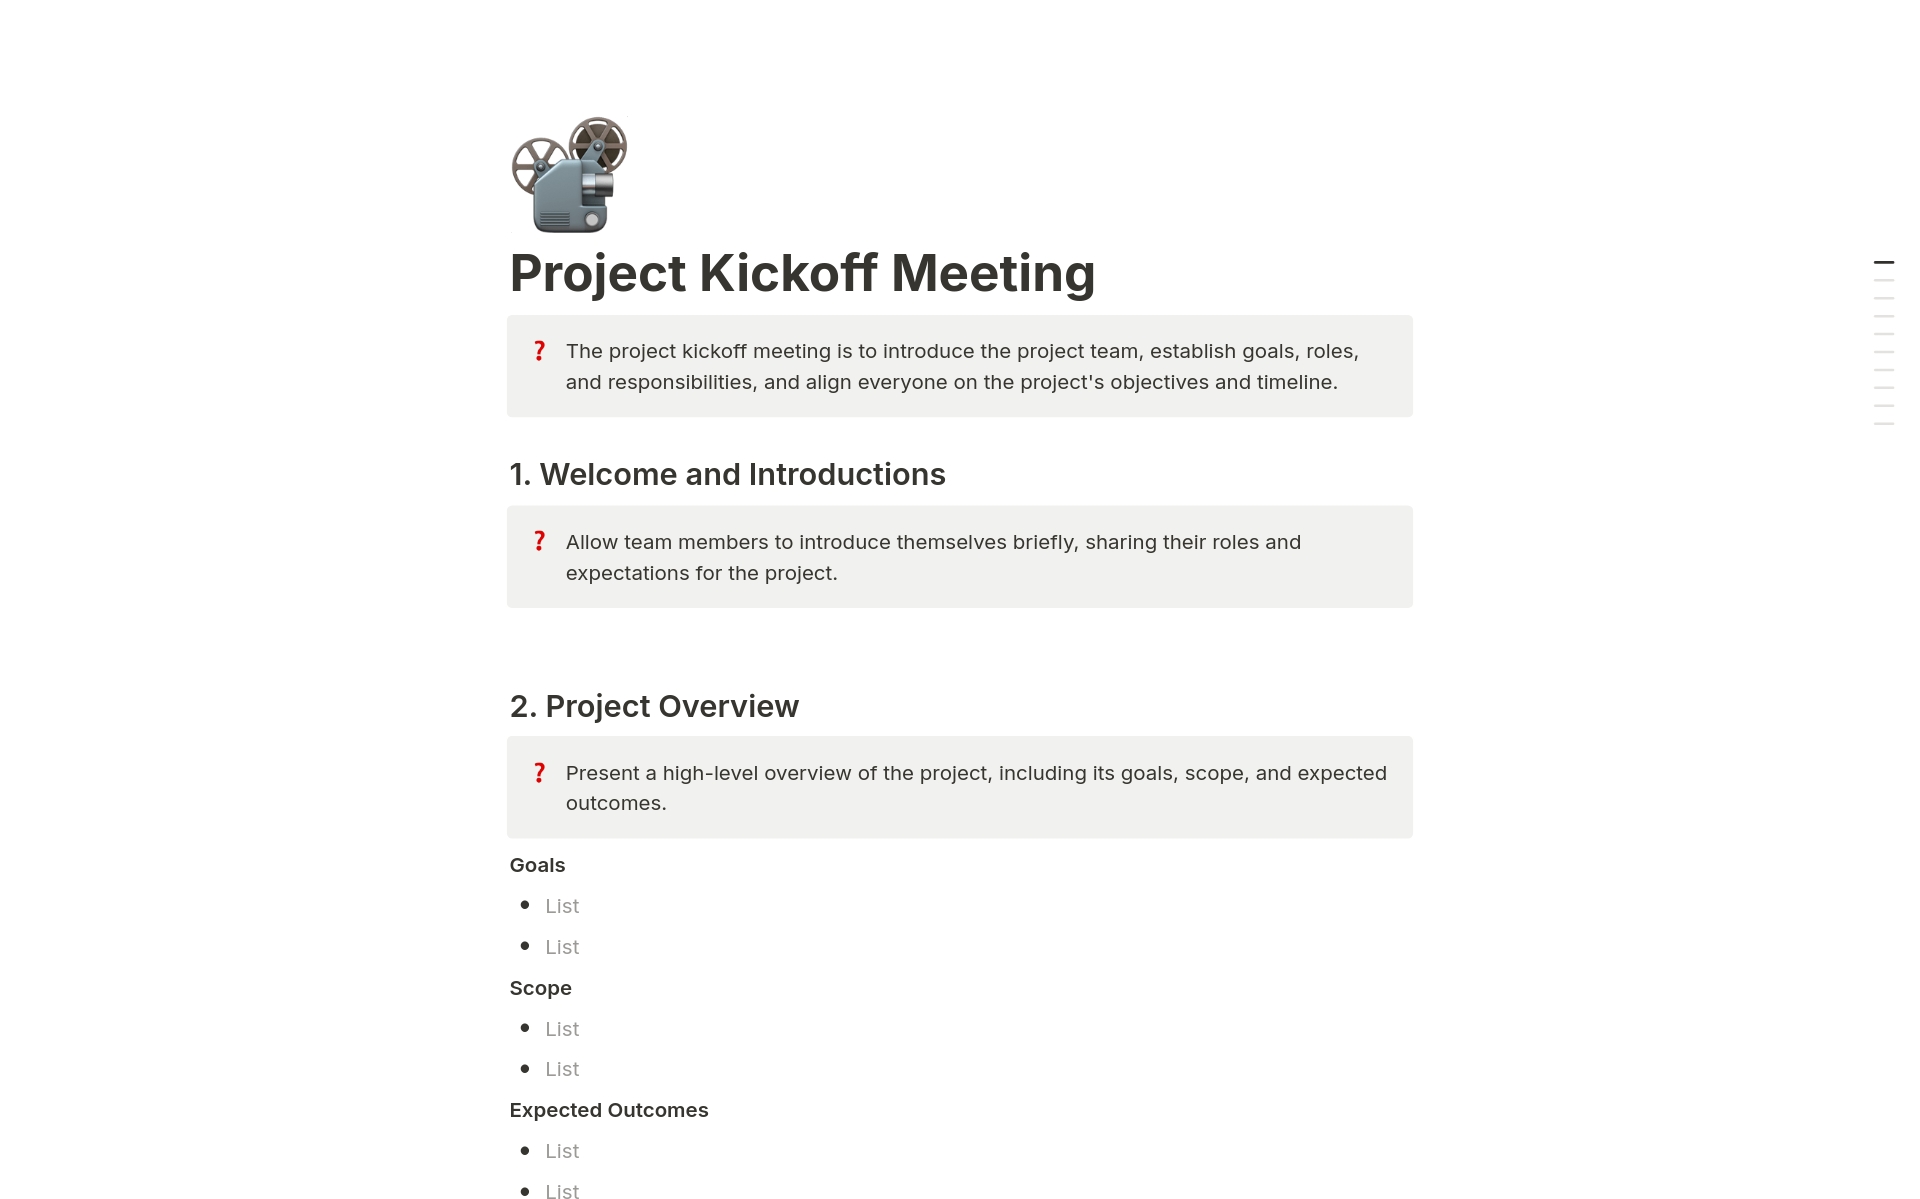 The project kickoff meeting is to introduce the project team, establish goals, roles, and responsibilities, and align everyone on the project's objectives and timeline.